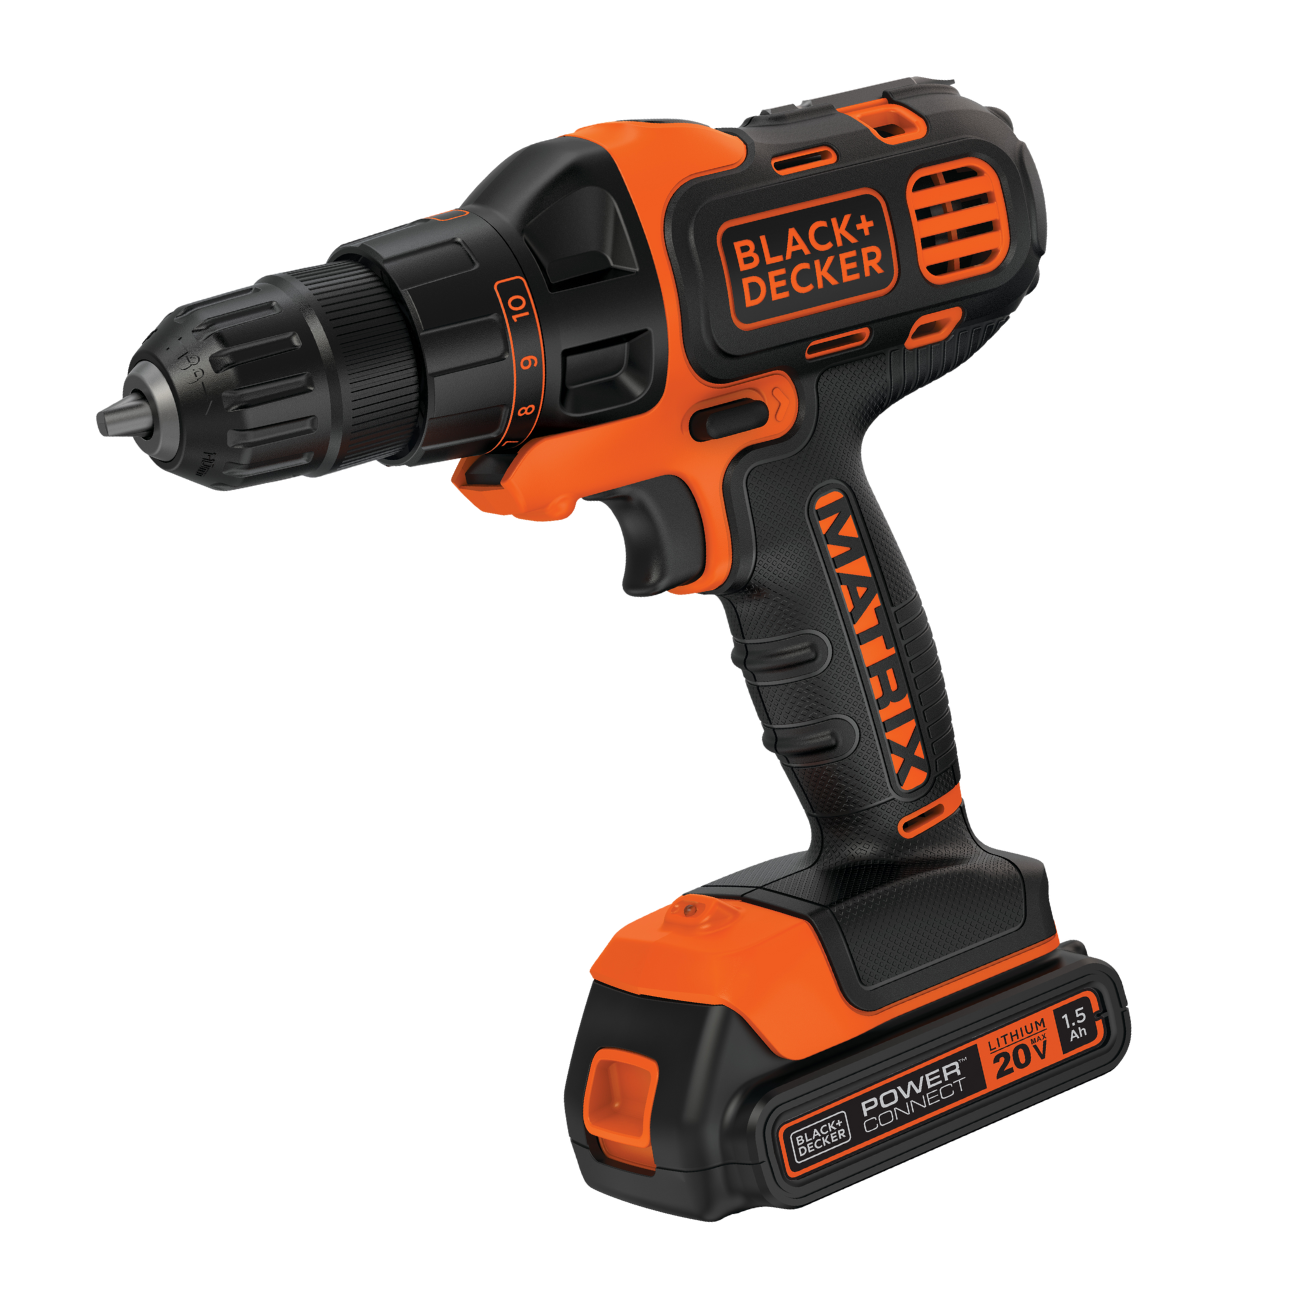 BLACK+DECKER 20V MAX Lithium-Ion Cordless Matrix Drill/Driver, (1) 1.5Ah  Battery, and Charger BDCDMT120C - The Home Depot